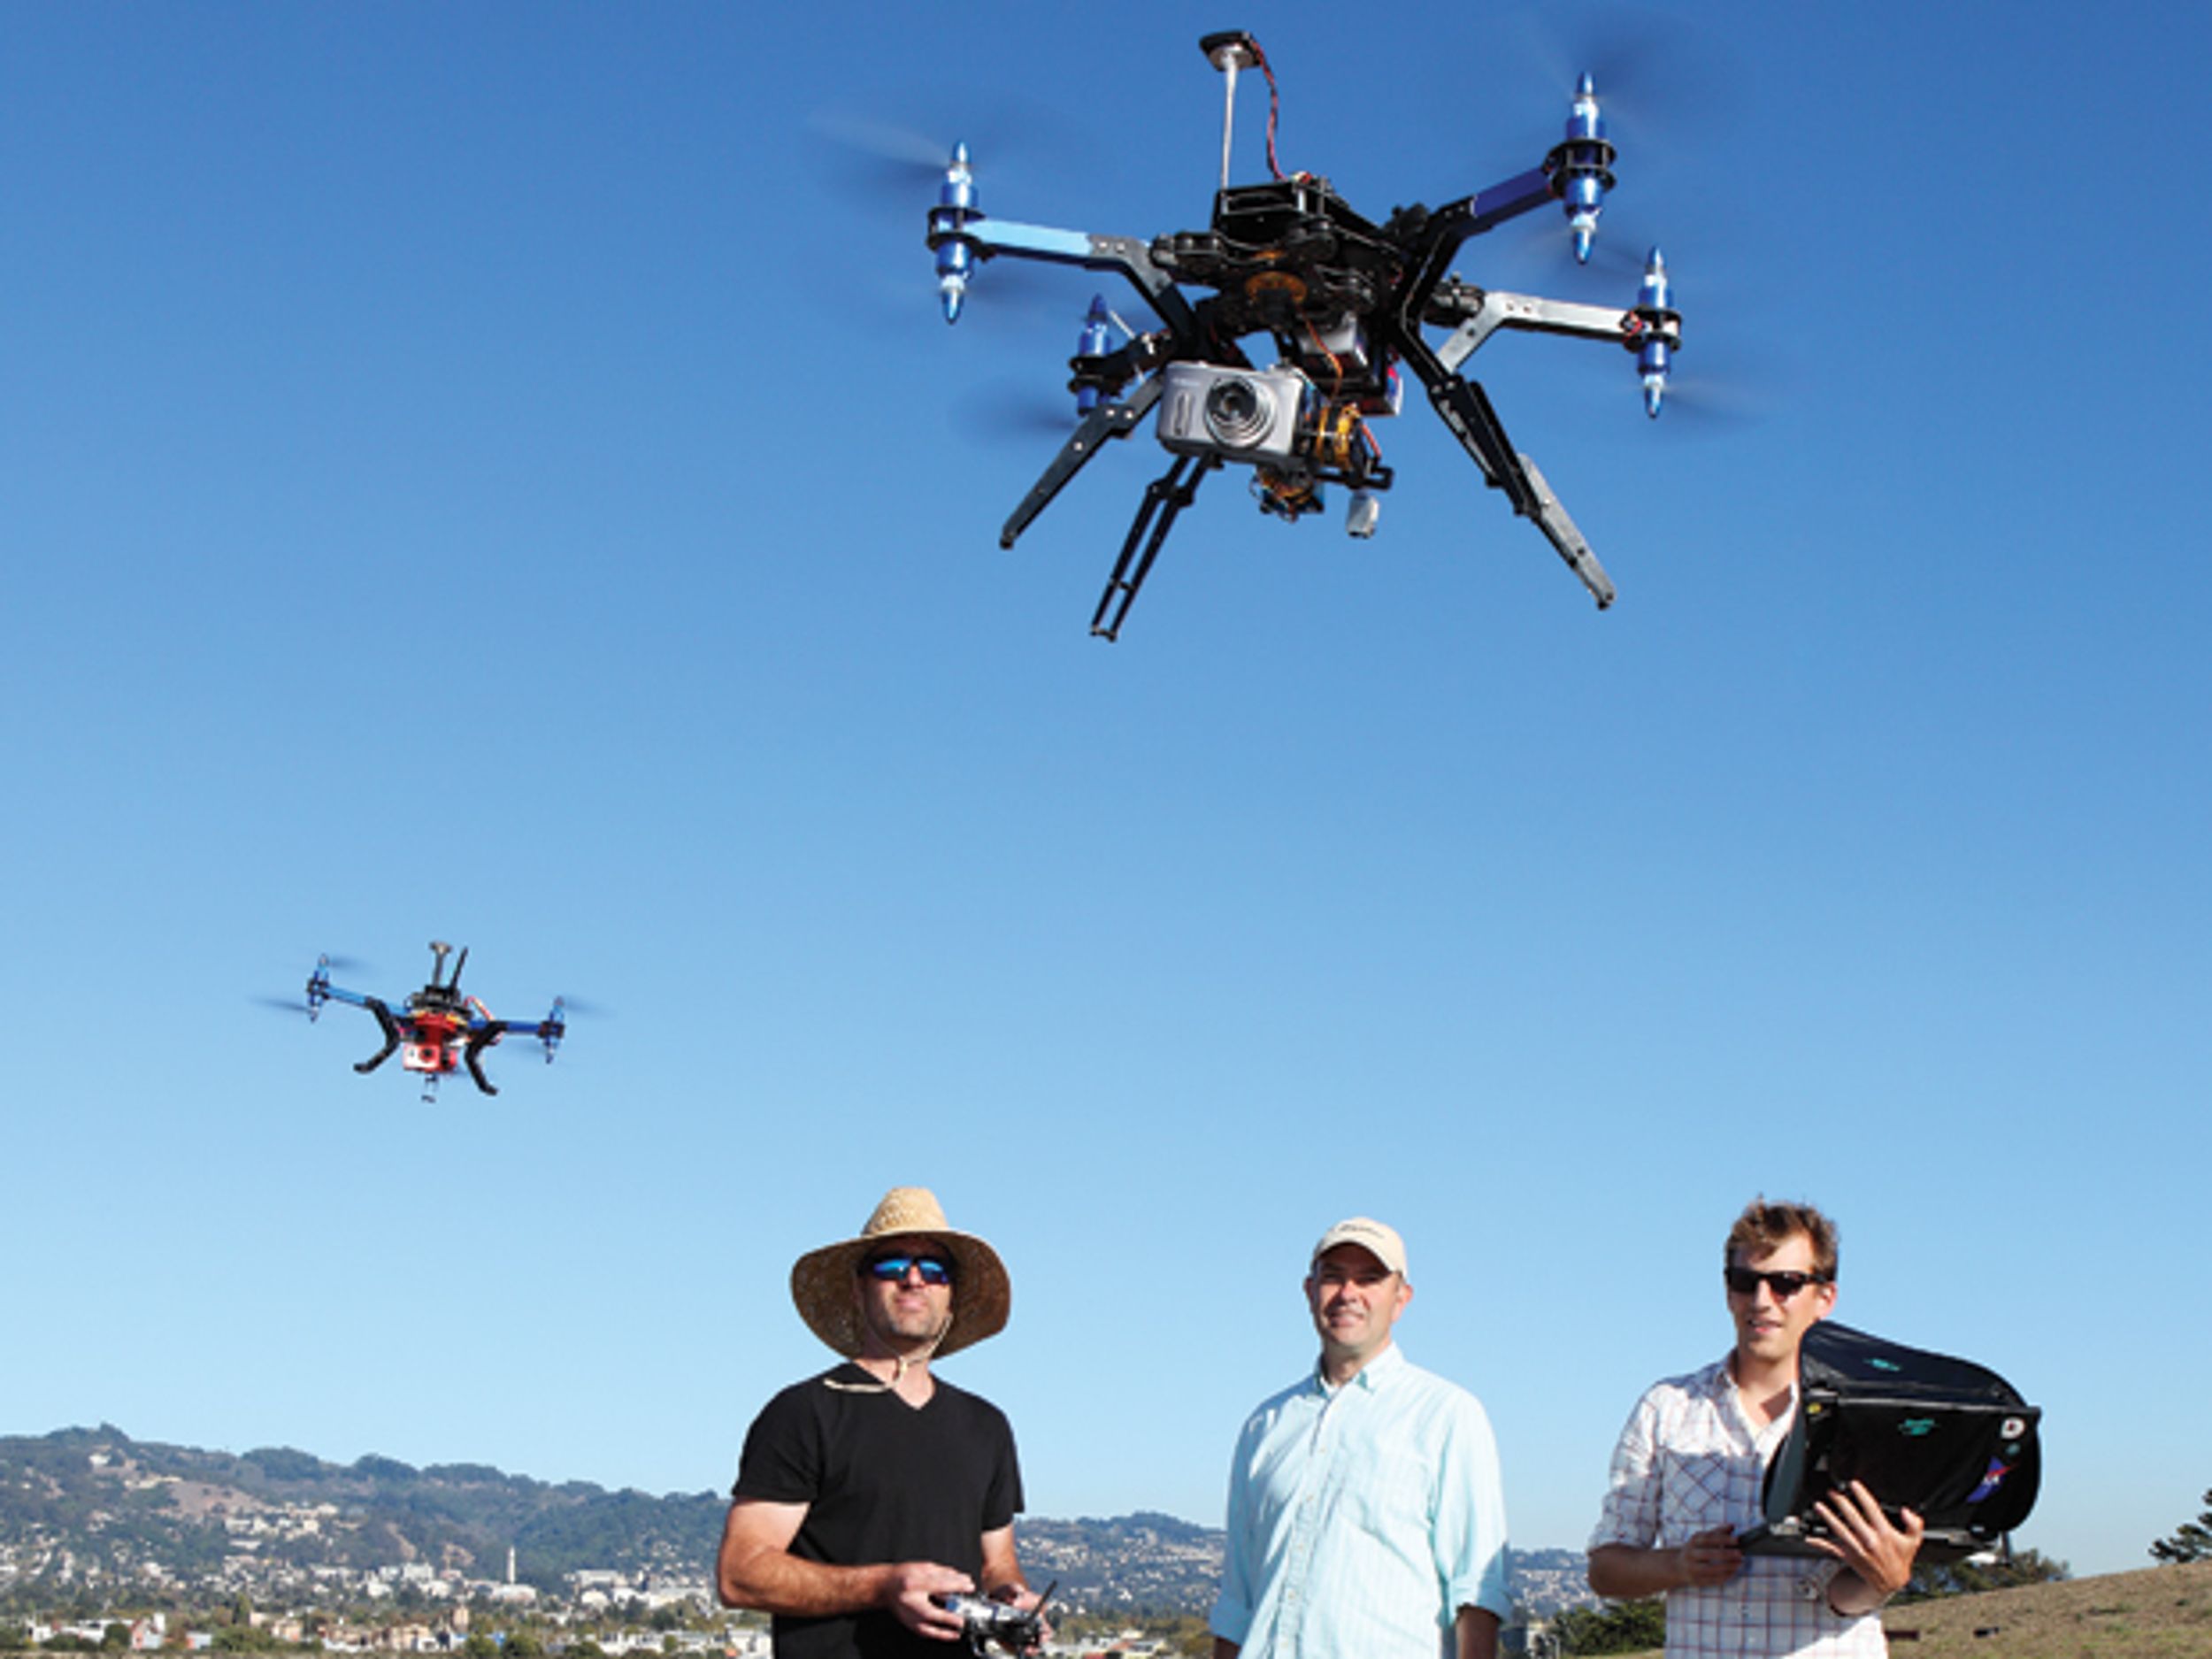 Chris Anderson’s Expanding Drone Empire